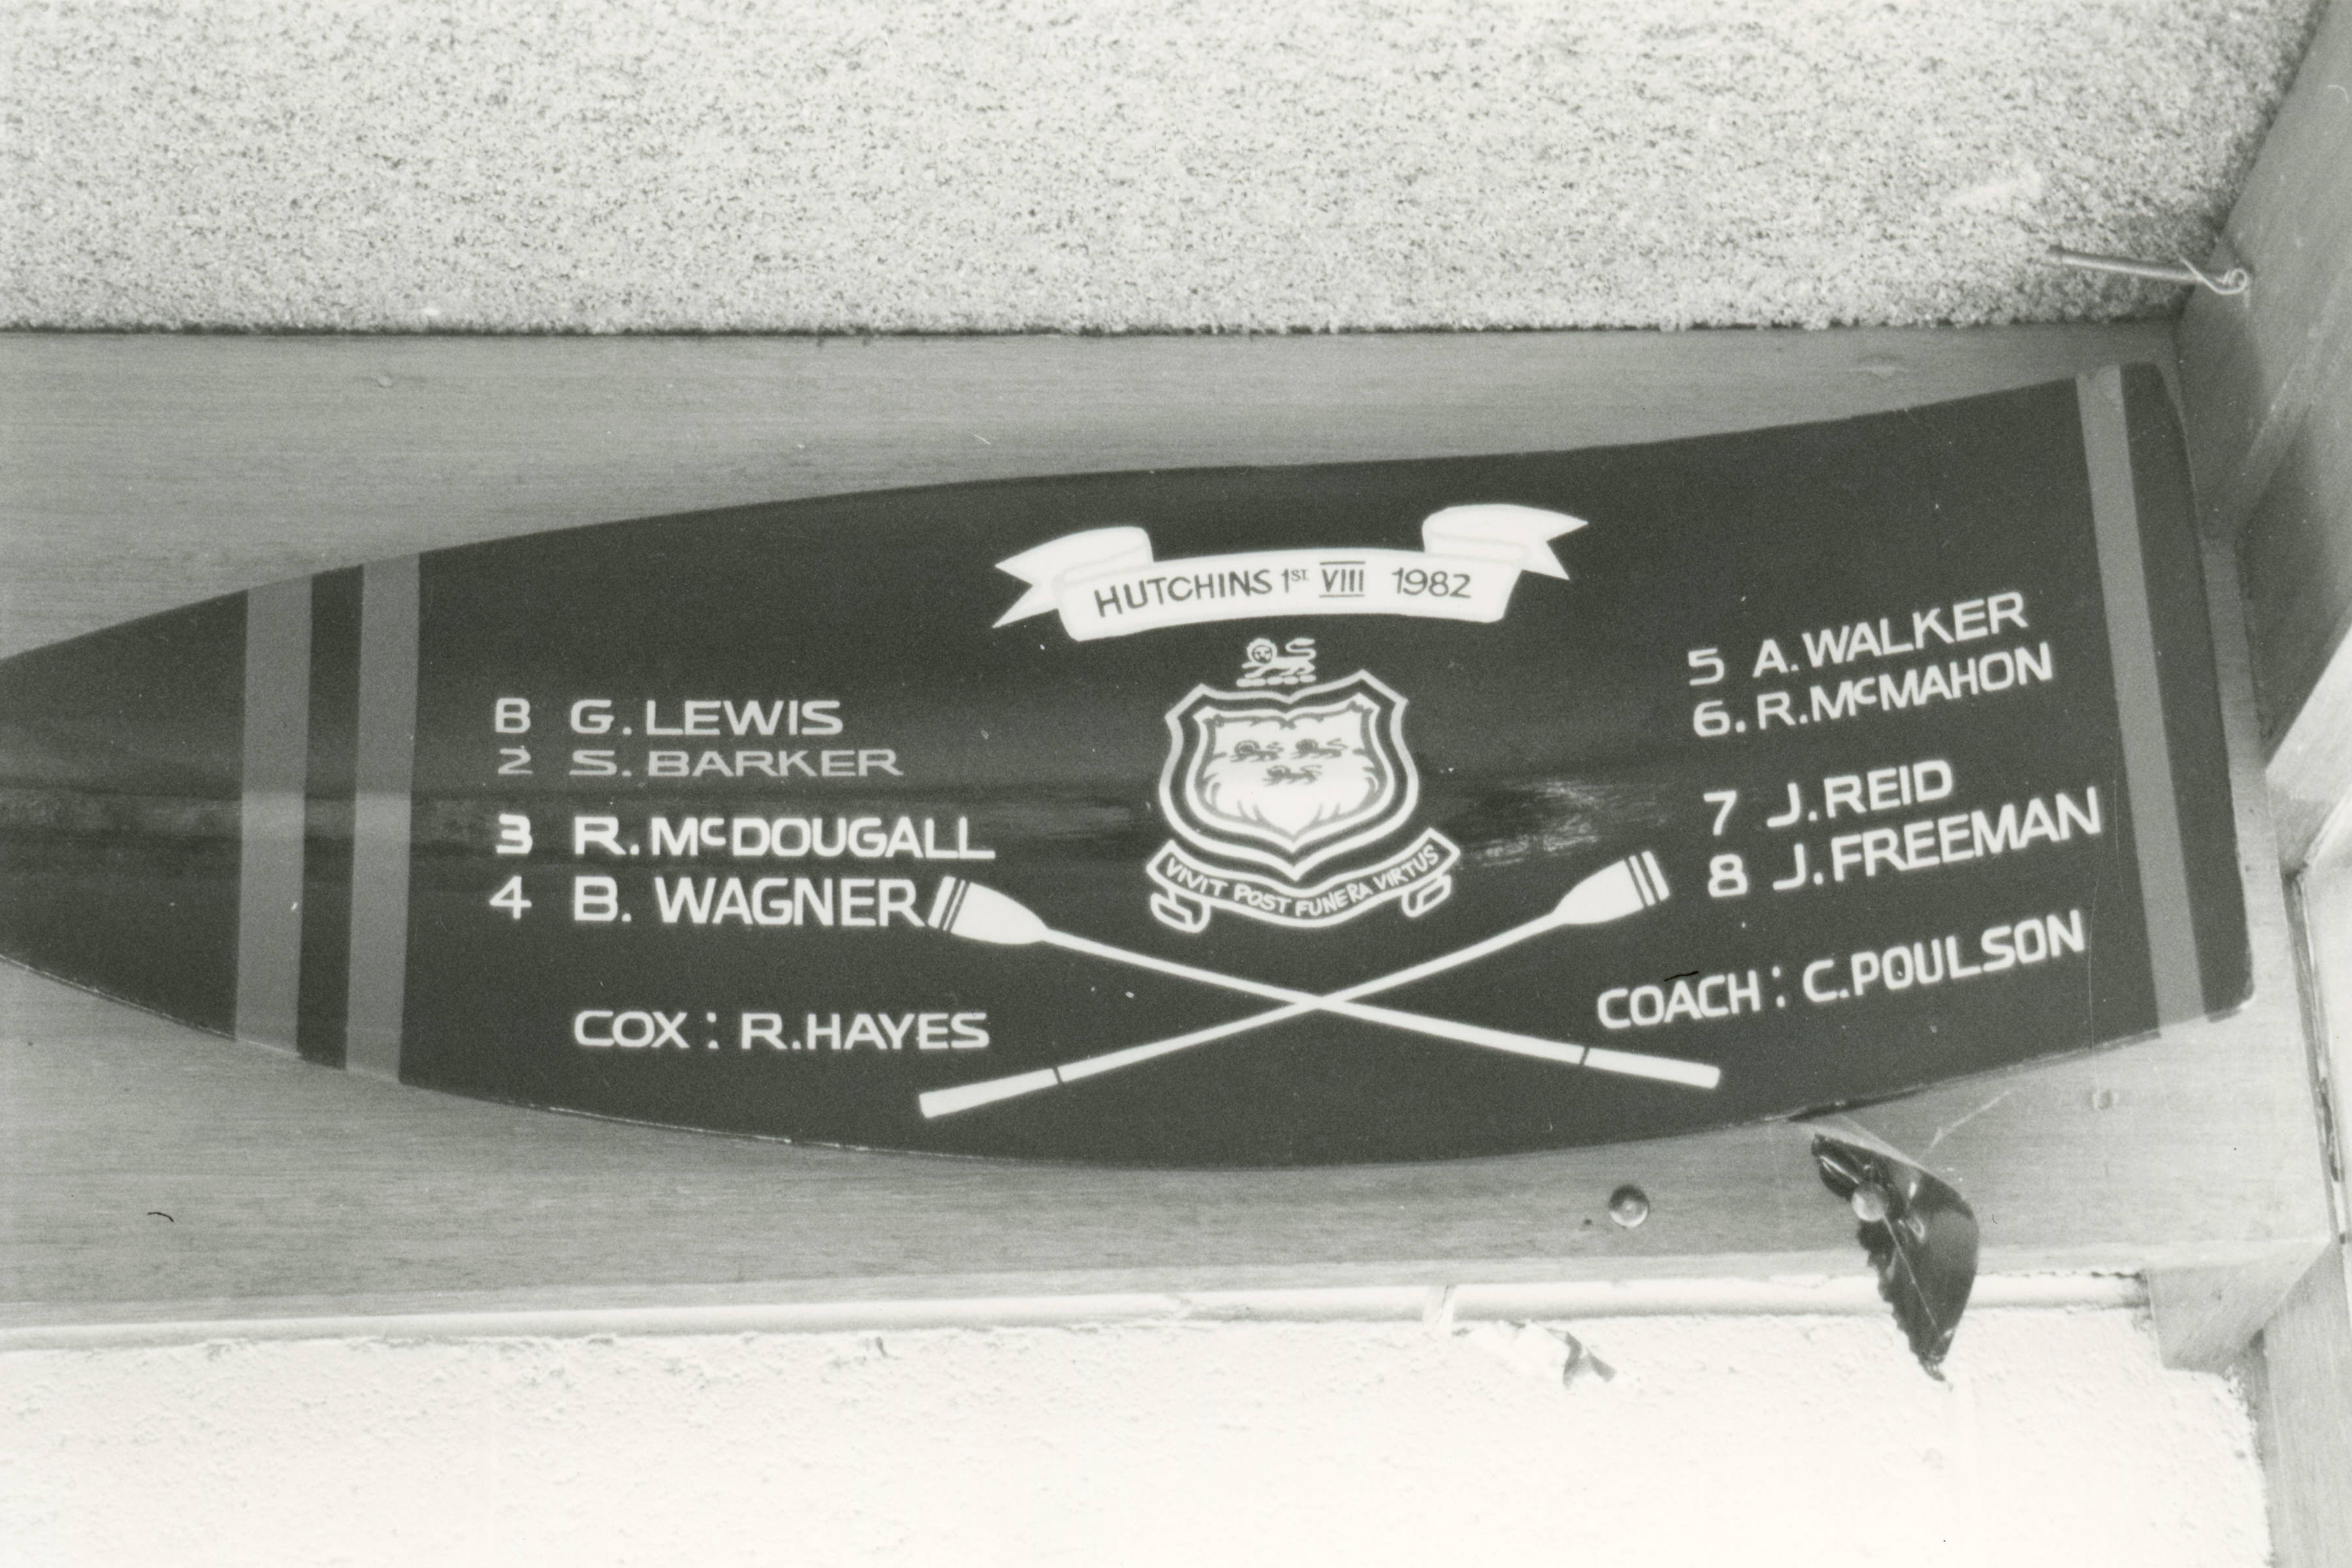 Oar of the First Eight, 1982.